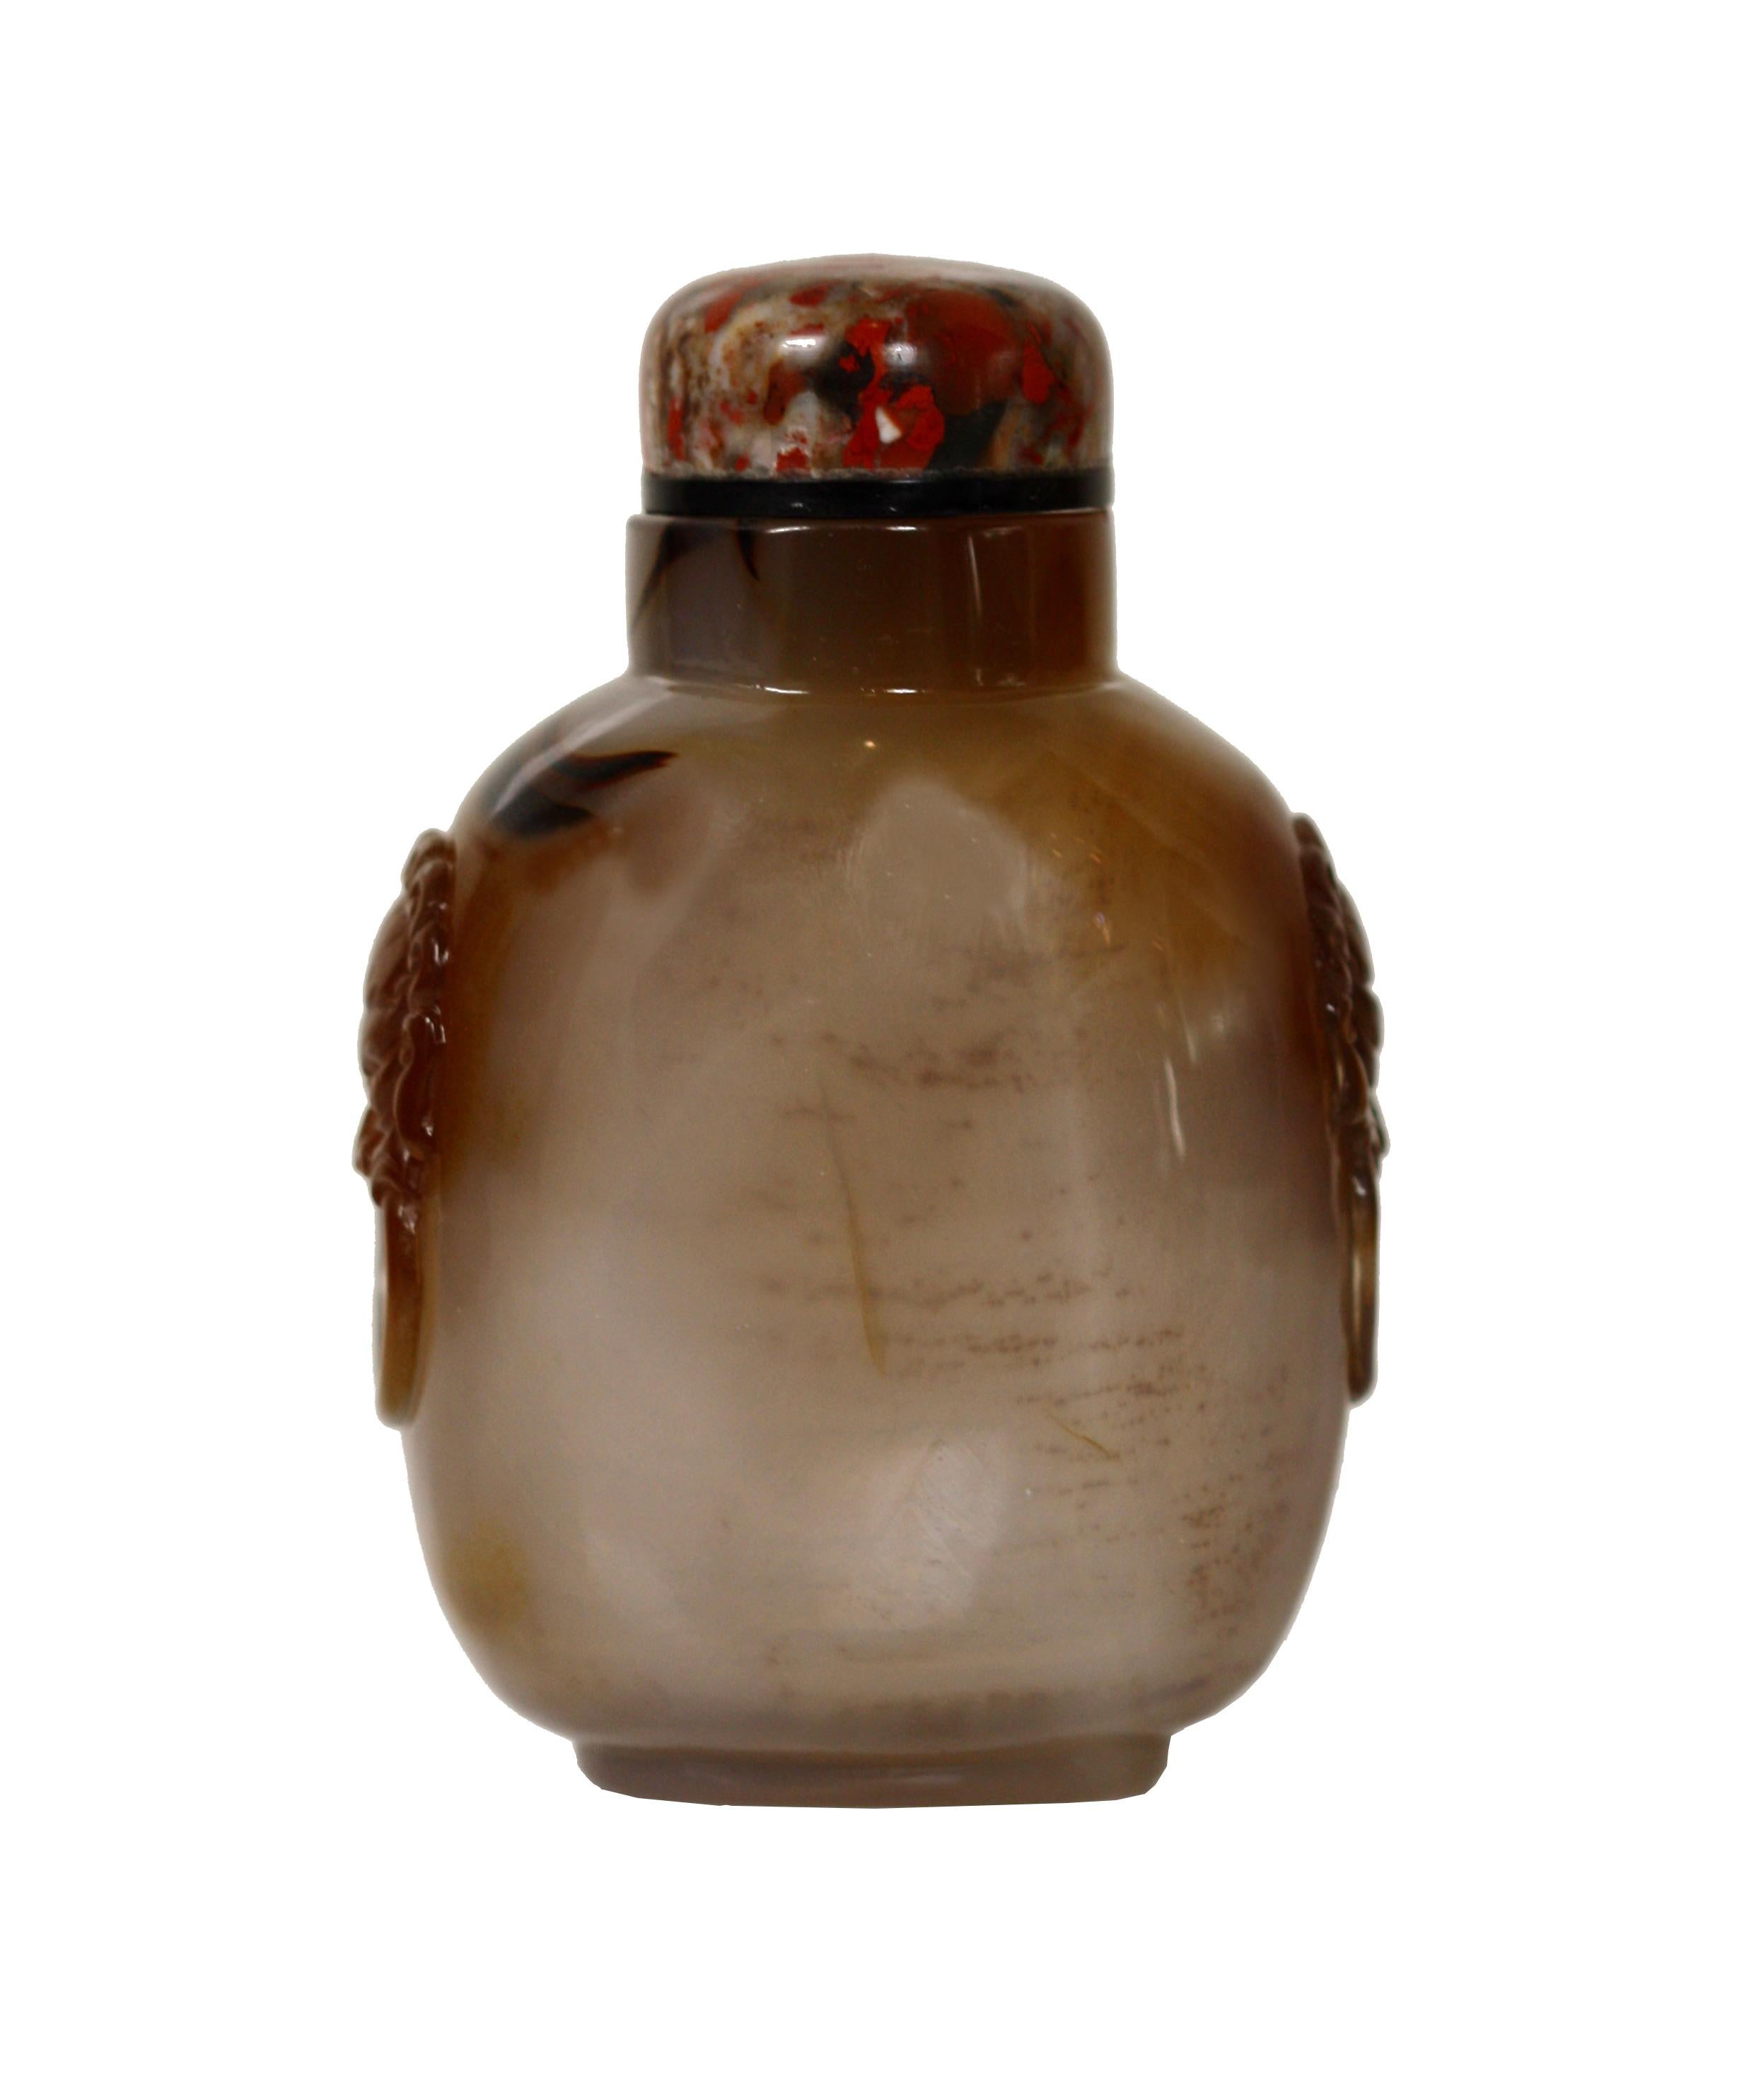 An Agate snuff bottle
Chinese, Qing Dynasty 19th century, of ovoid shape with rounded shoulders carved with lion-mask ring handles on the shoulders, has stopper
Measures: Height 3 in. (7.62 cm.)(including stopper).